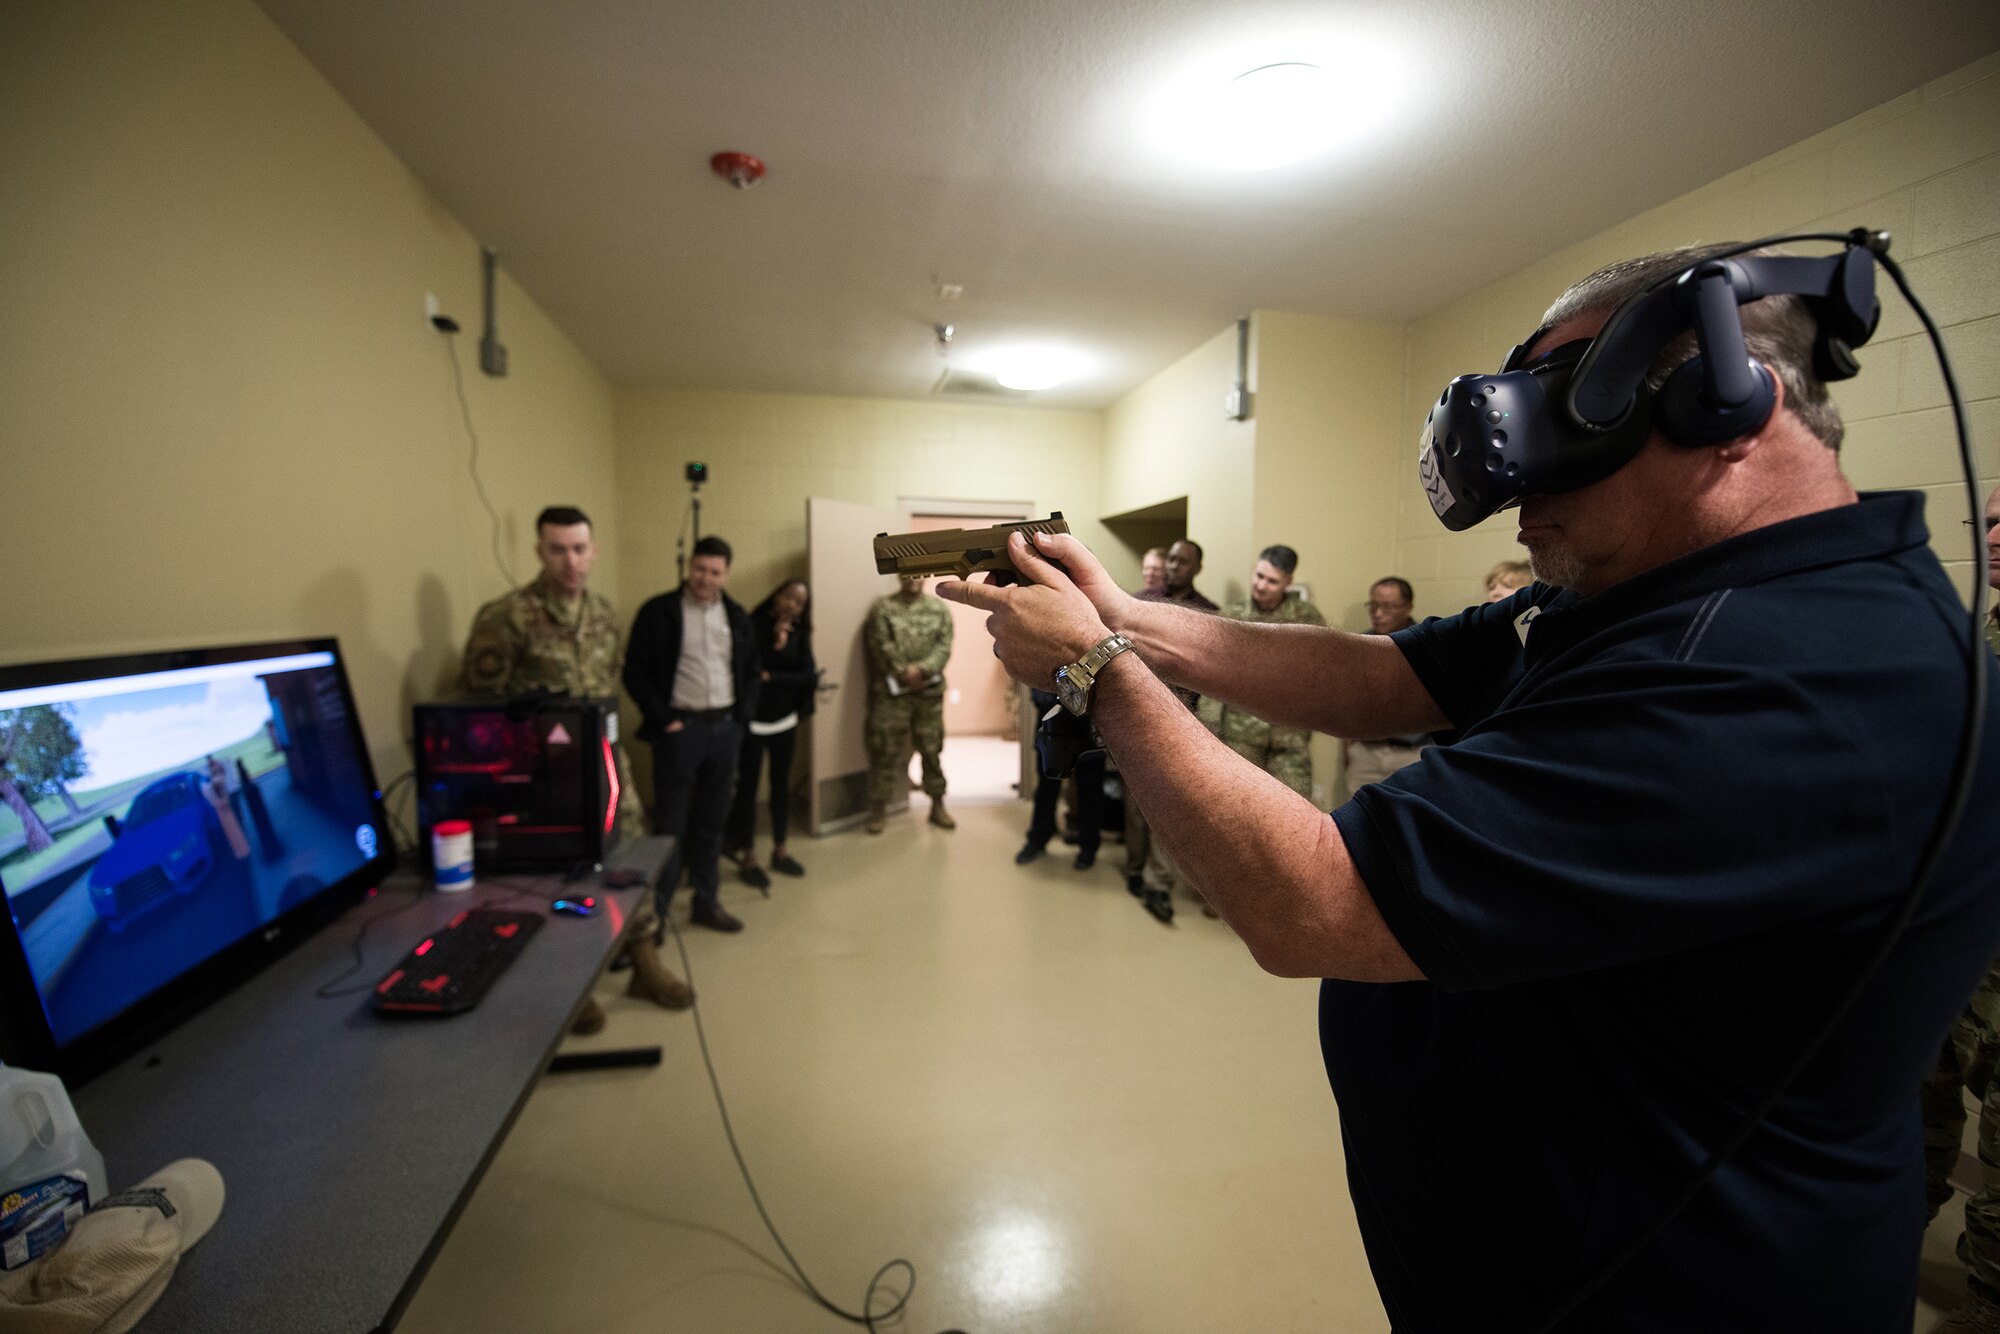 Civic leader David Radcliffe (right), President of the Radcliffe Group, Keller Williams Realty Southwest, tries a virtual reality simulator at the Security Forces mock Air Base and firearms simulators building, Nov. 7, 2019, at Joint Base San Antonio-Medina Annex, Texas